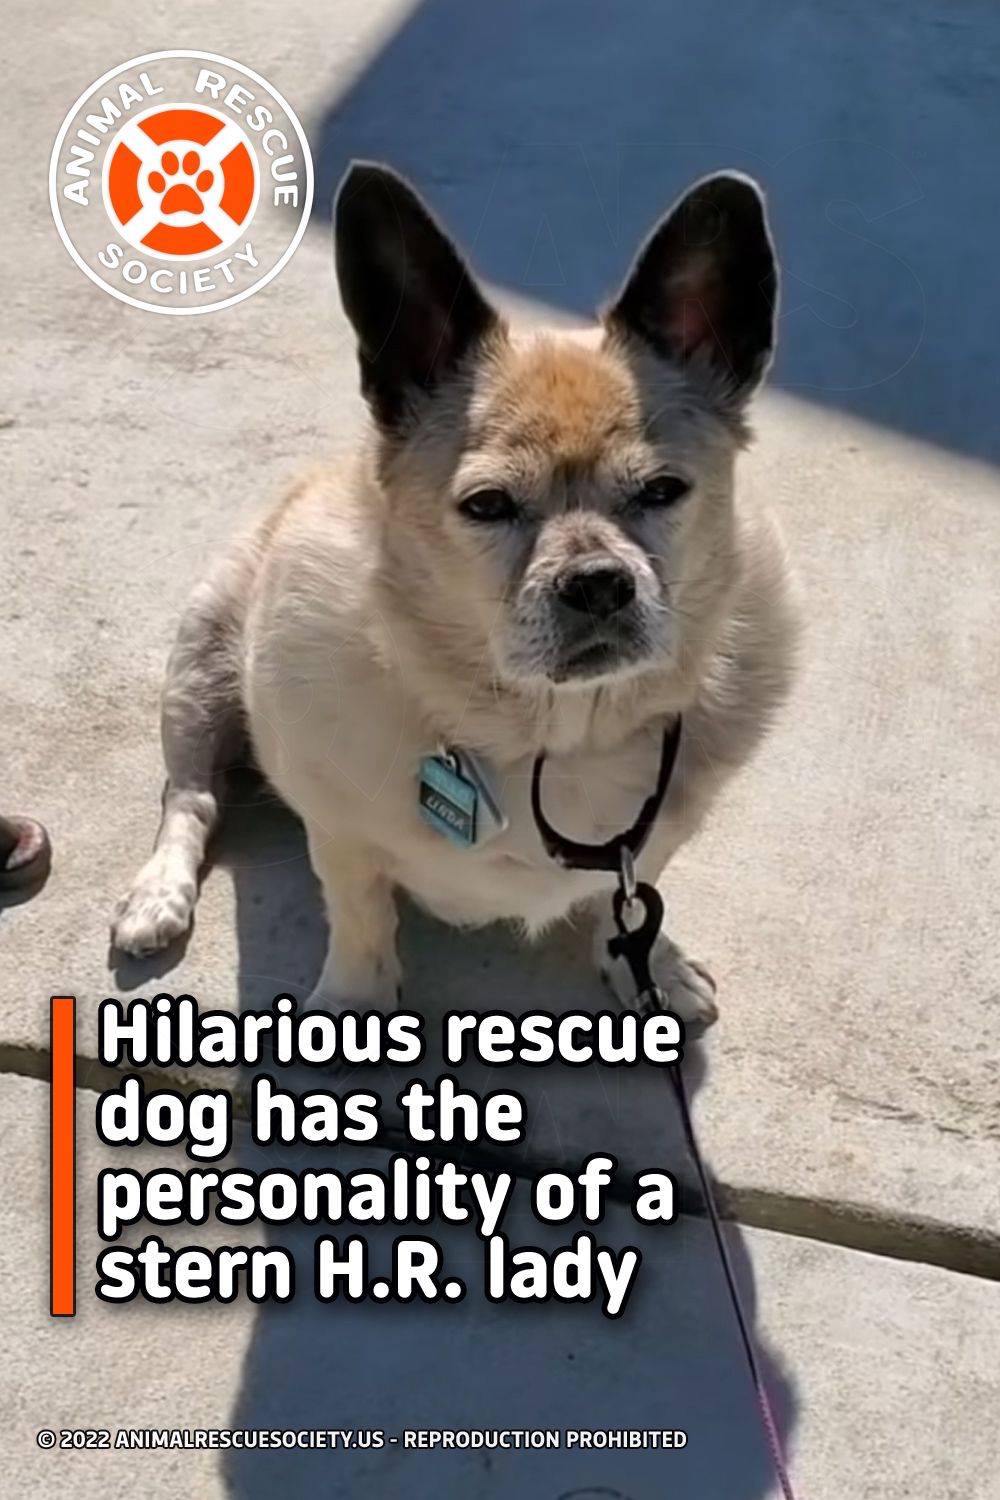 Hilarious rescue dog has the personality of a stern H.R. lady